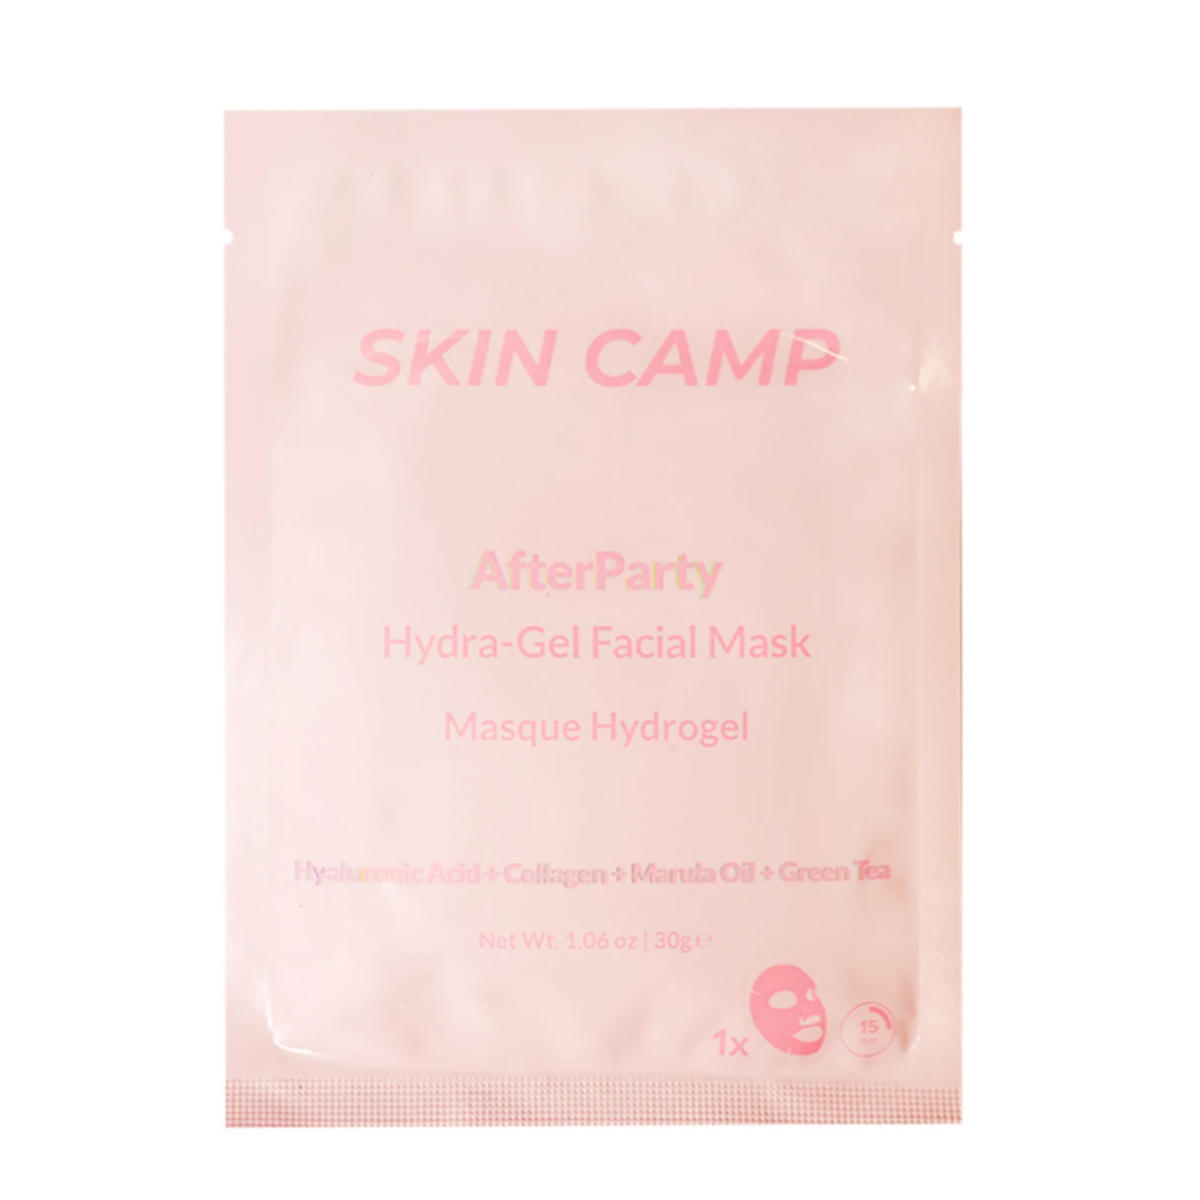 Primary image of AfterParty Hydra-Gel Facial Mask